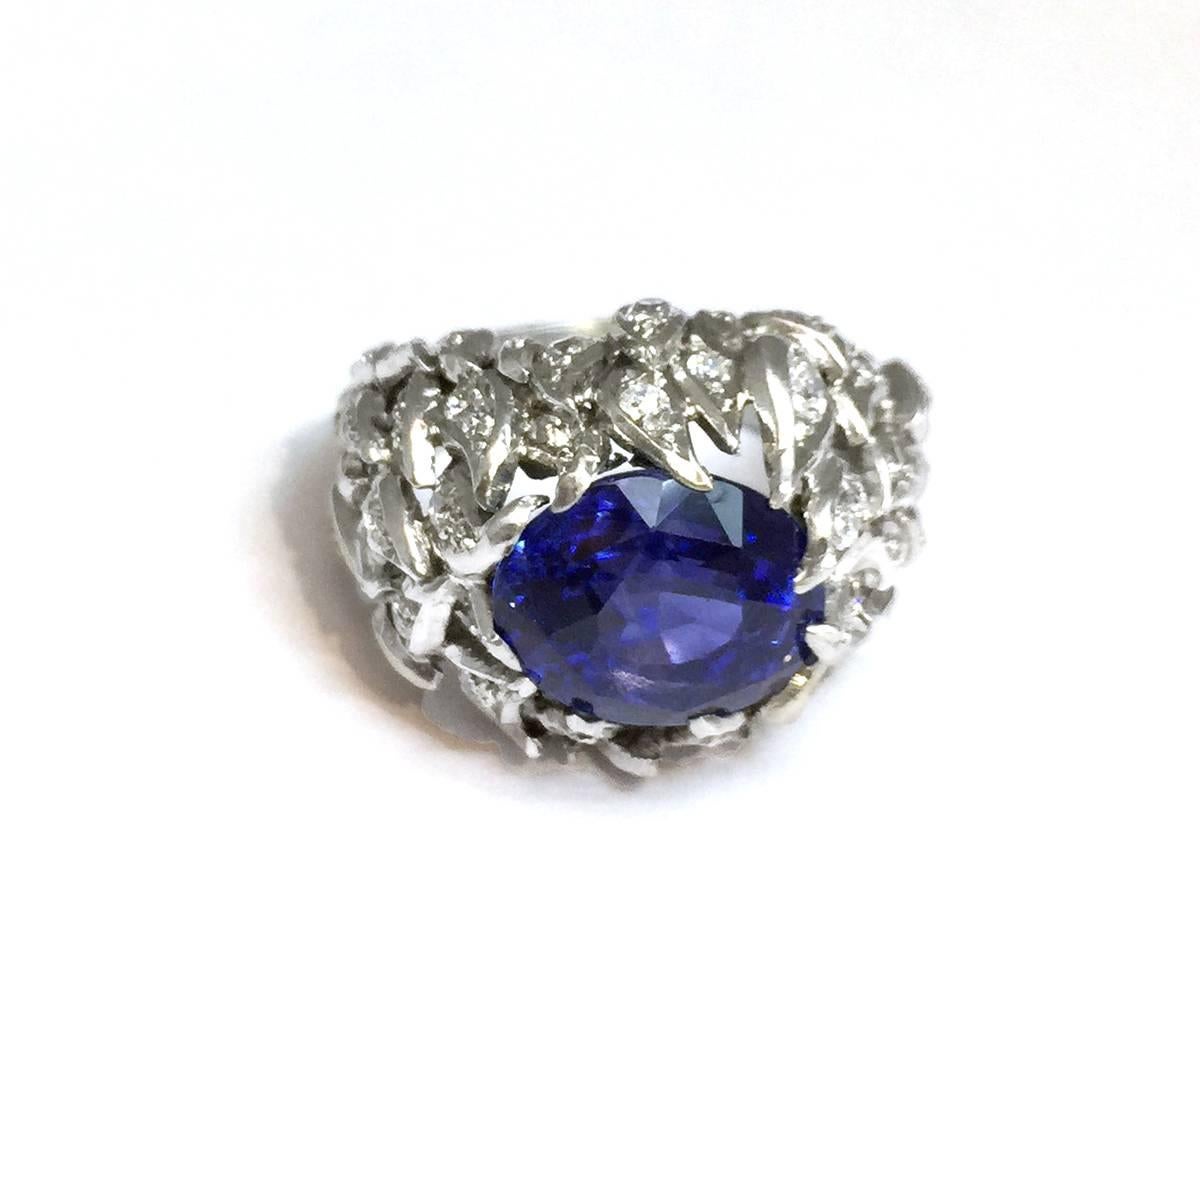 Dome platinum ring set with a 9 carat natural burmese sapphire surrounded with brilliants in a pattern of flames.
Weight : 32,10 grams.
Two certificates stating the estimated weight of the stone is 9 carats and natural saphir from Myanmar